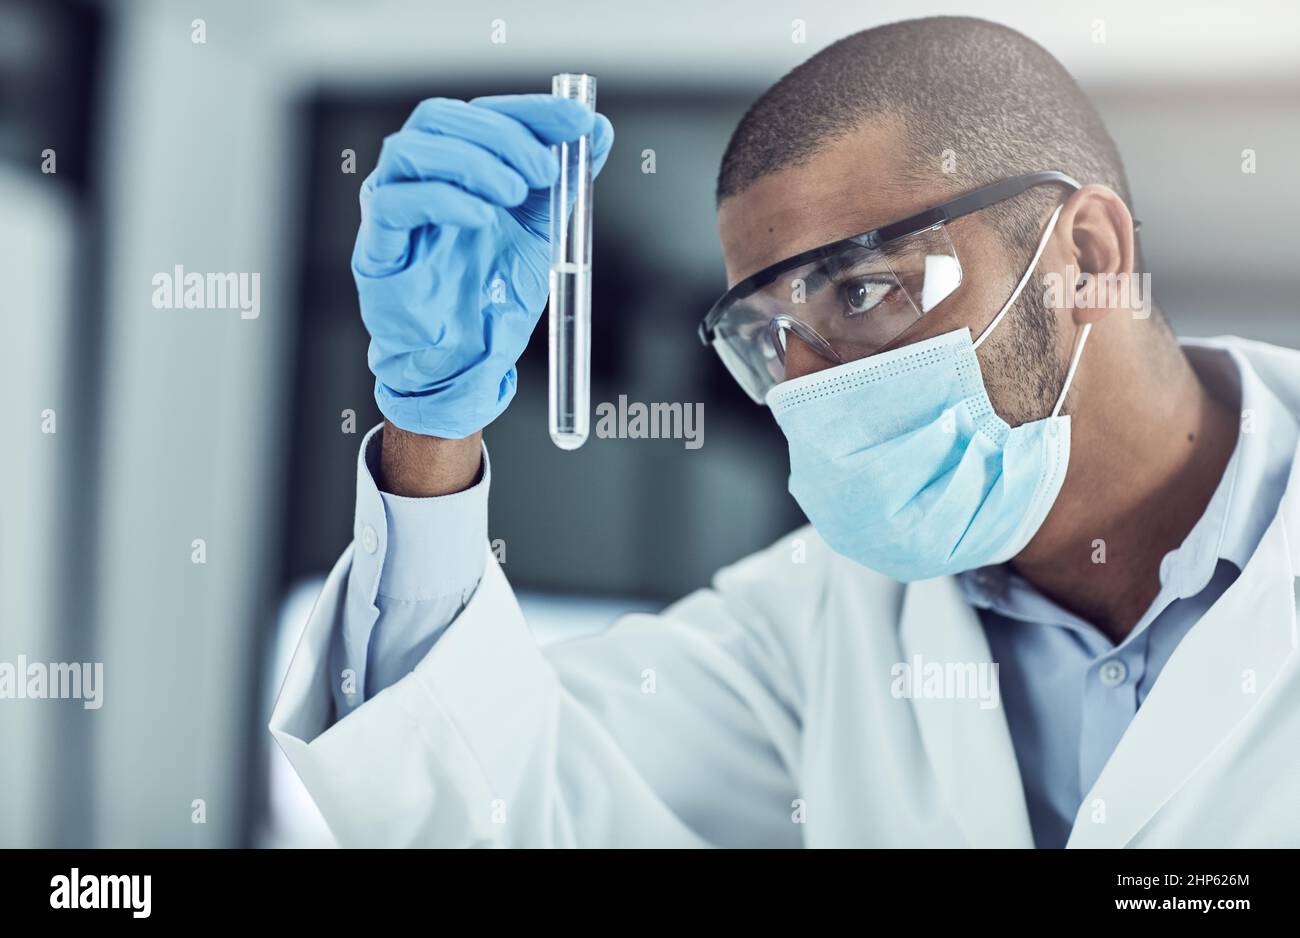 The mysteries of the physical and chemical world intrigue me. Shot of a young scientist conducting an experiment in his lab. Stock Photo